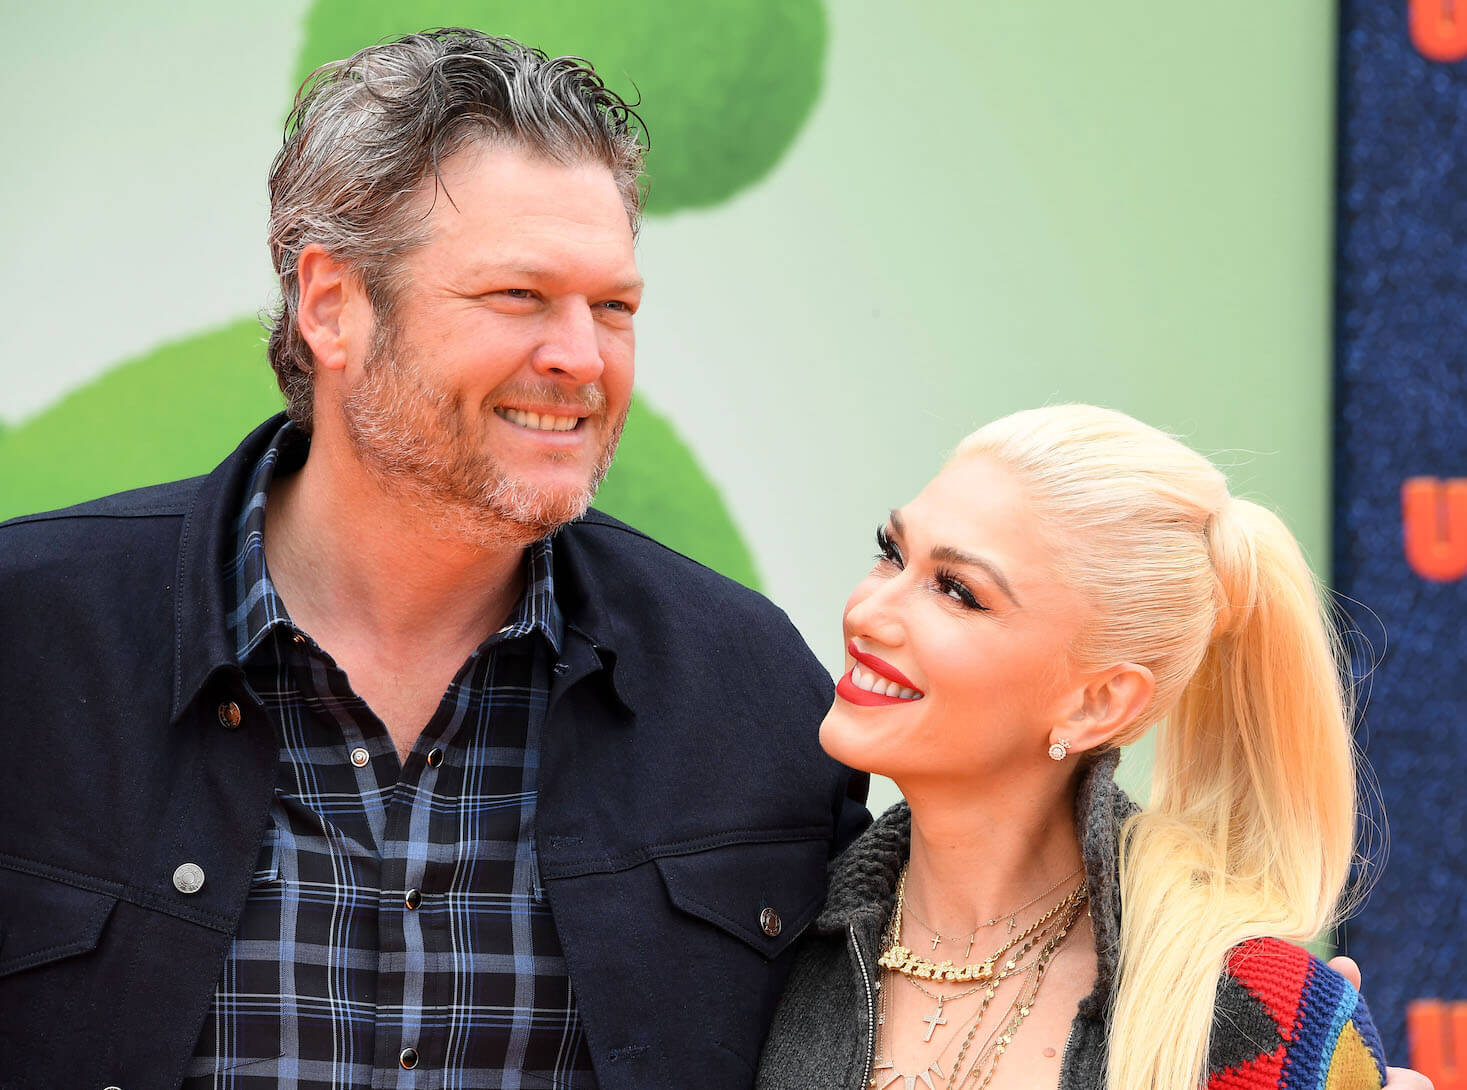 Blake Shelton and Gwen Stefani from 'The Voice' smiling together